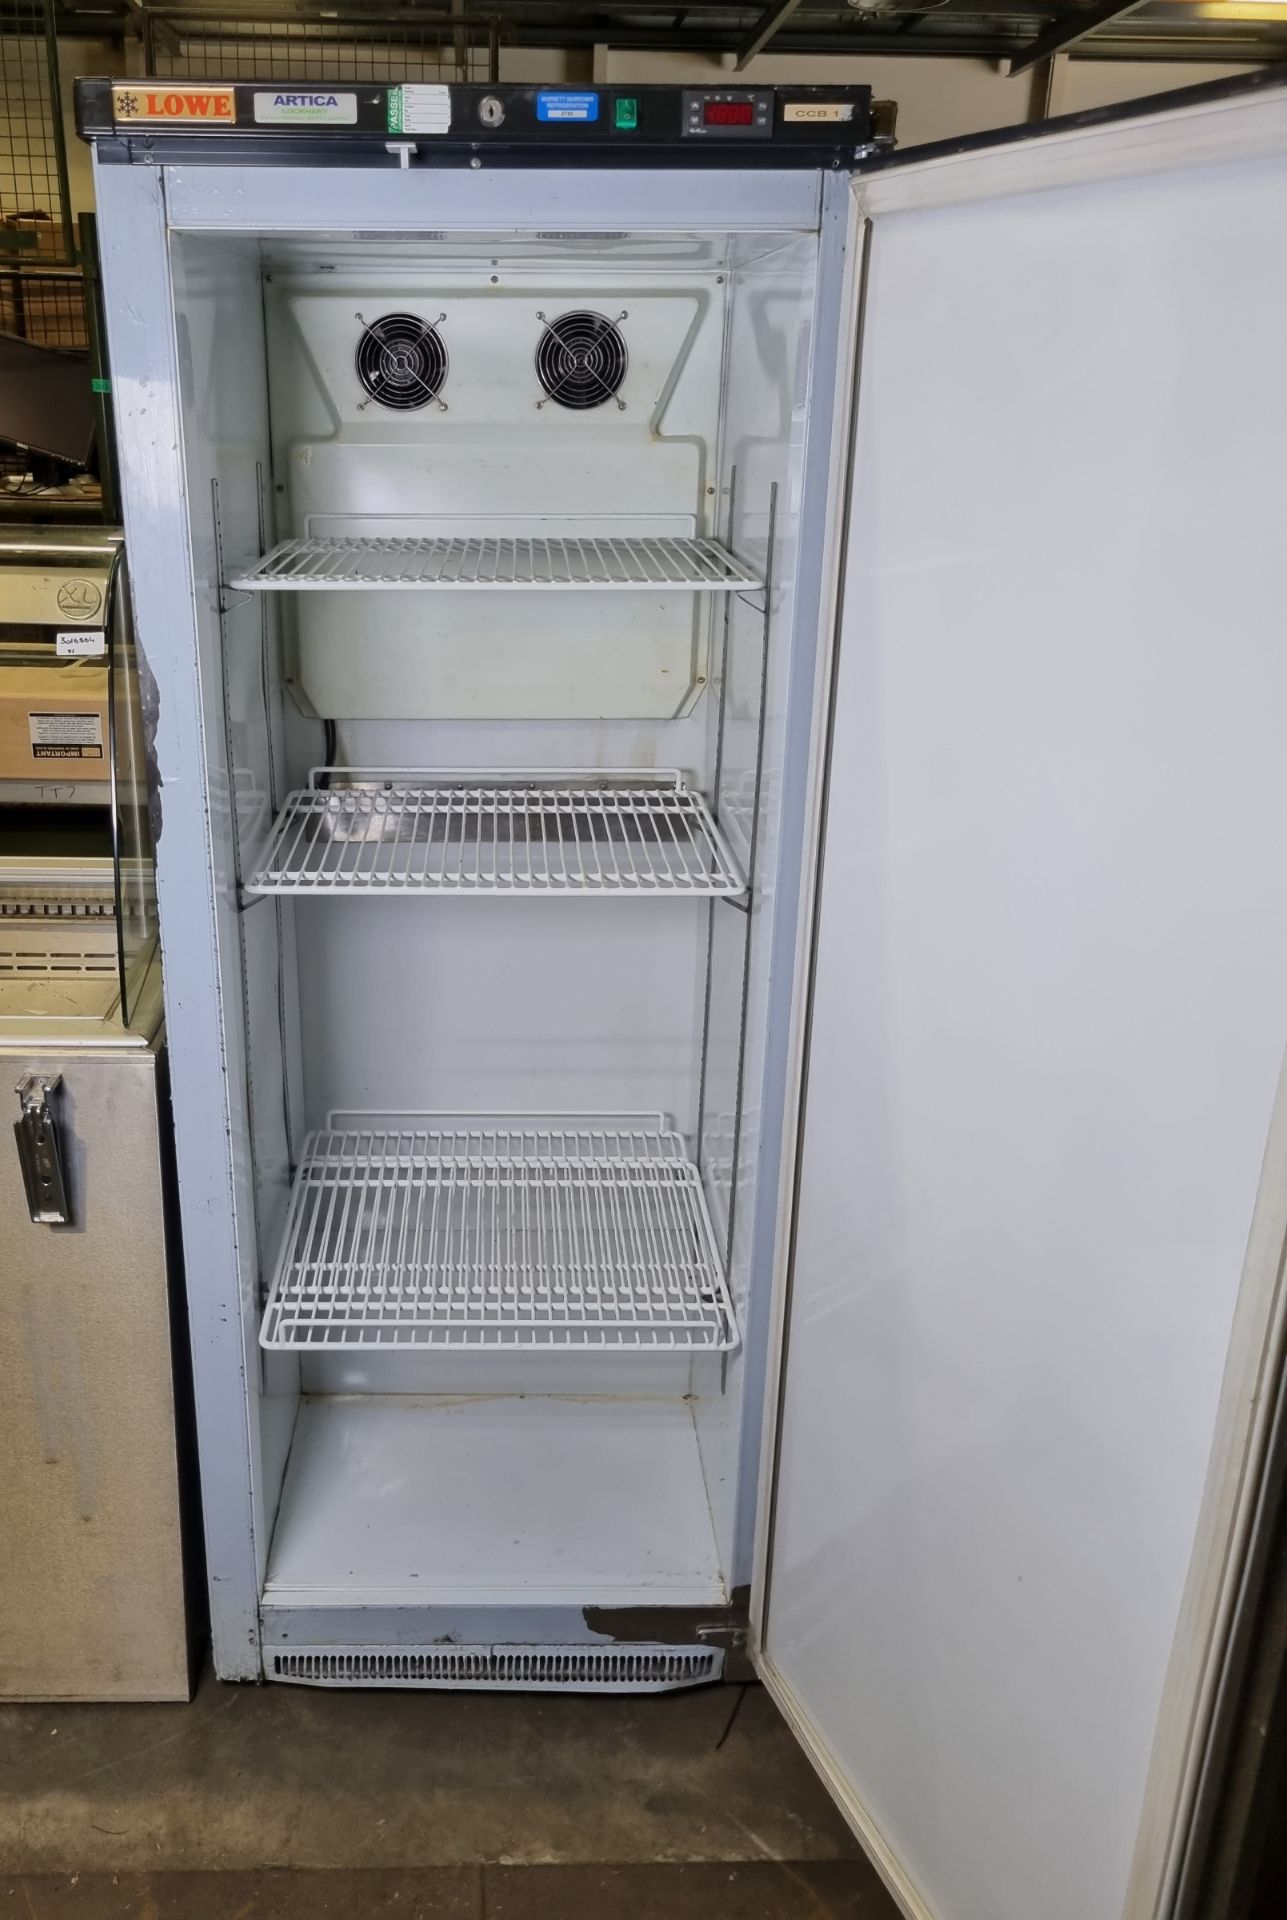 Lowe L500WC/XC refrigerator - 220V - 50Hz - L74 x W70 x H181cm - Image 3 of 4